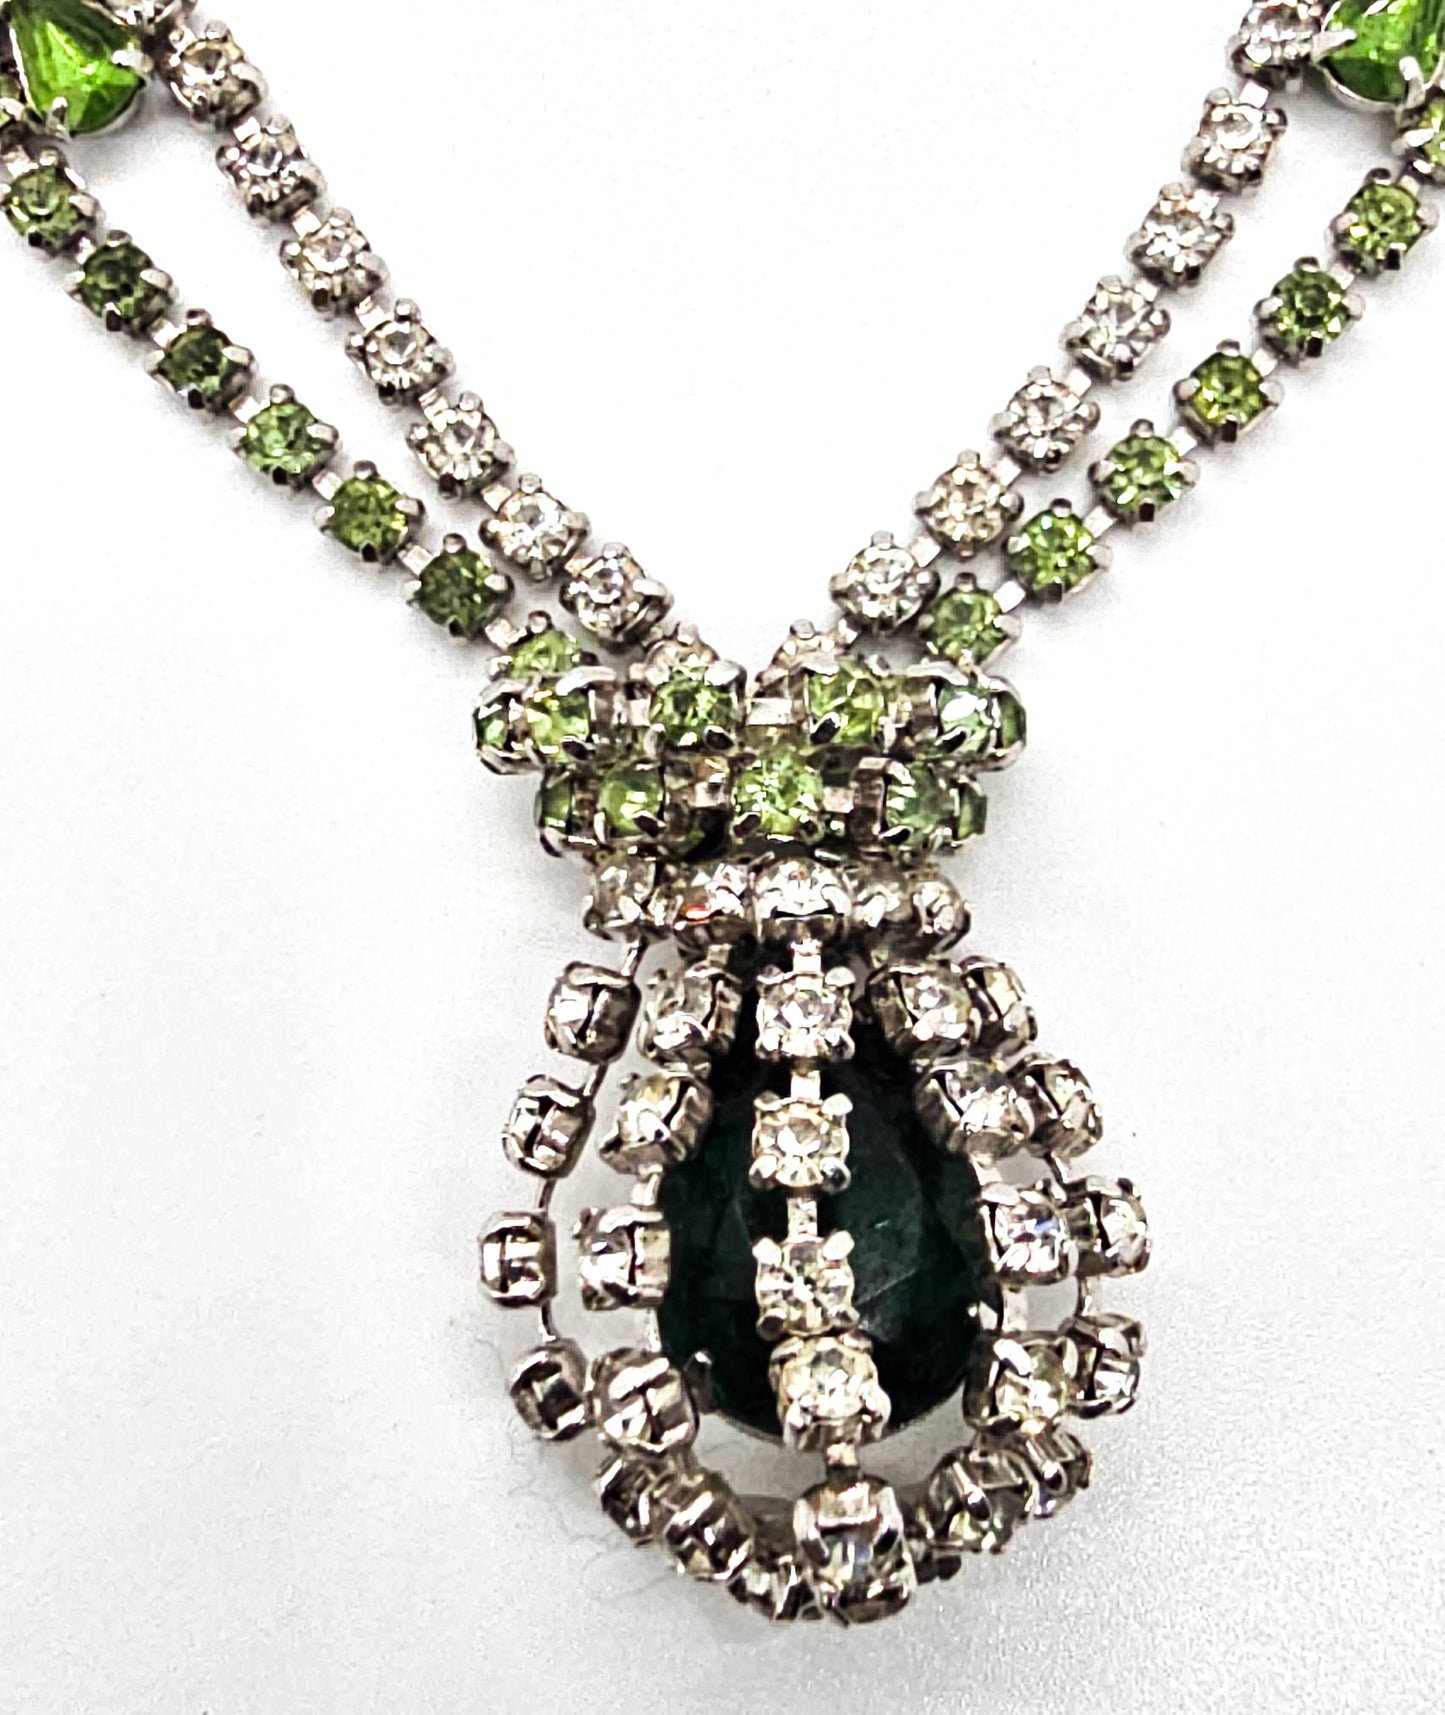 Green caged pendant vintage rhinestone holiday statement necklace